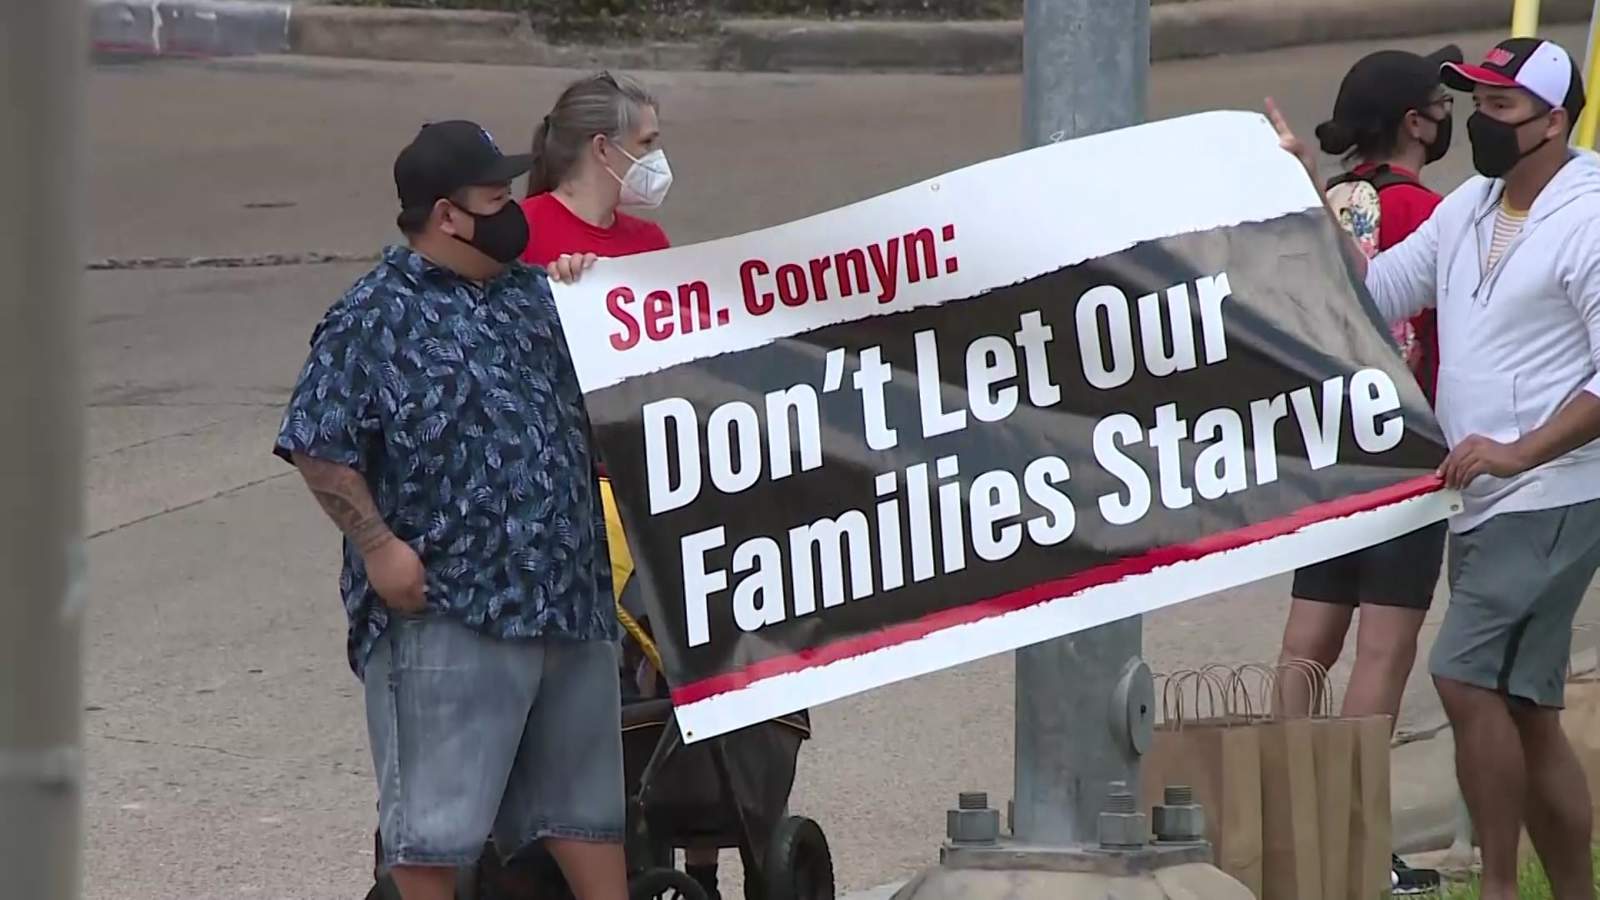 Unemployed Houstonians, HEROES Act supporters demonstrate and distribute food outside Sen. Cornyns office